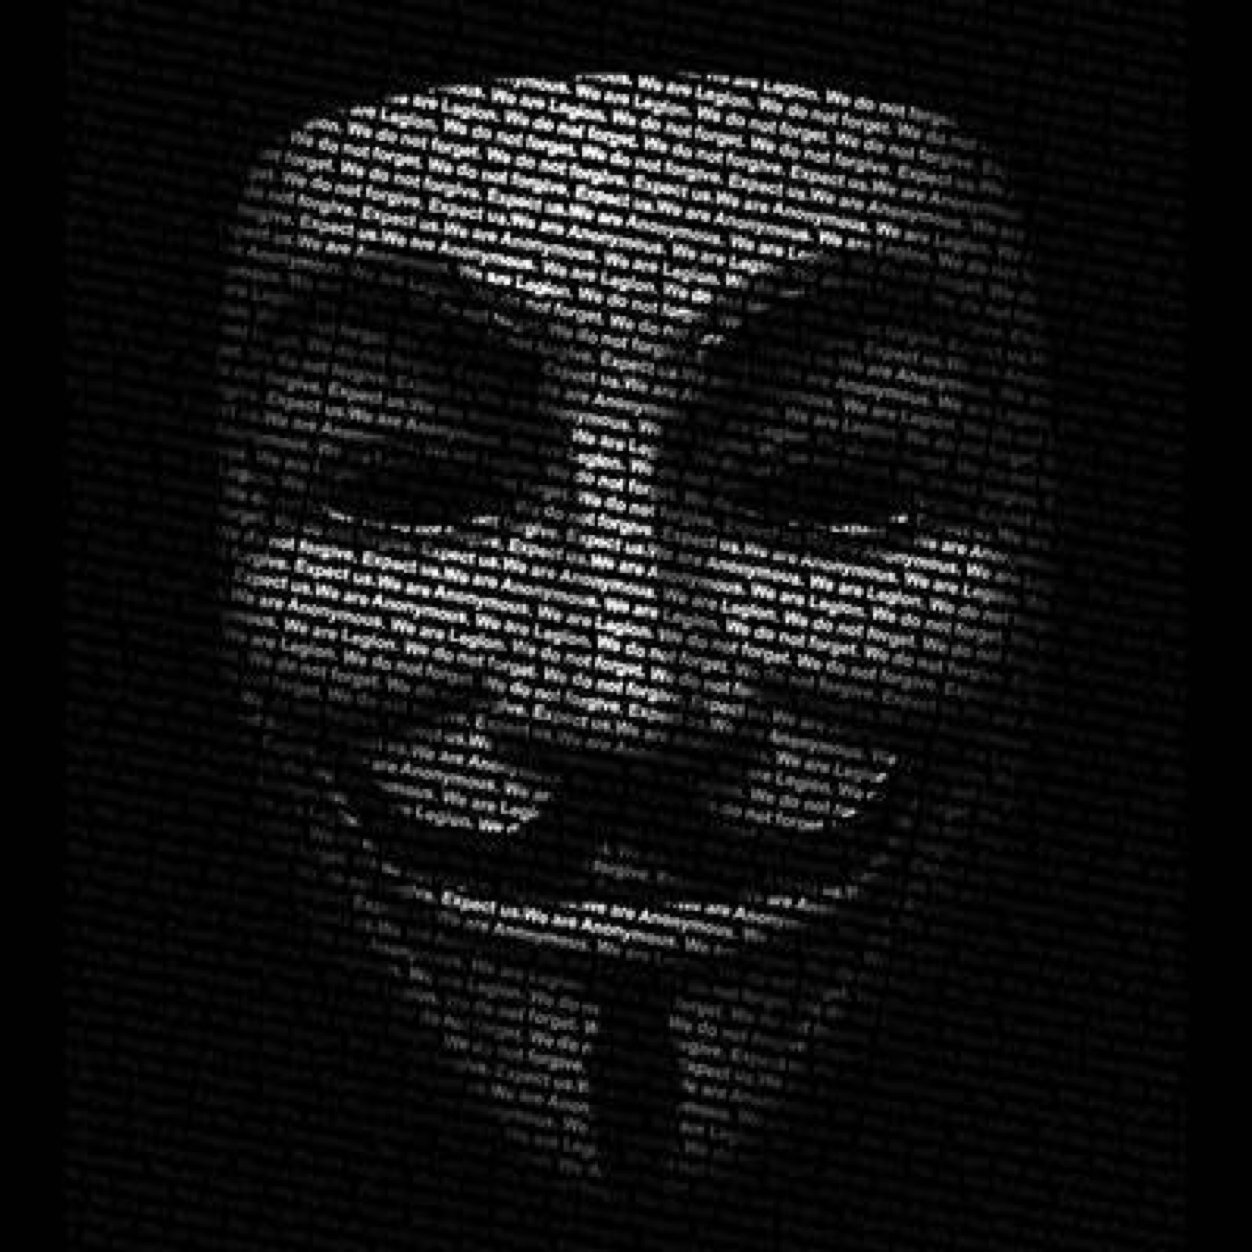 We are anonymous. We are legion. We do not forgive. We do not forget. Expect us.